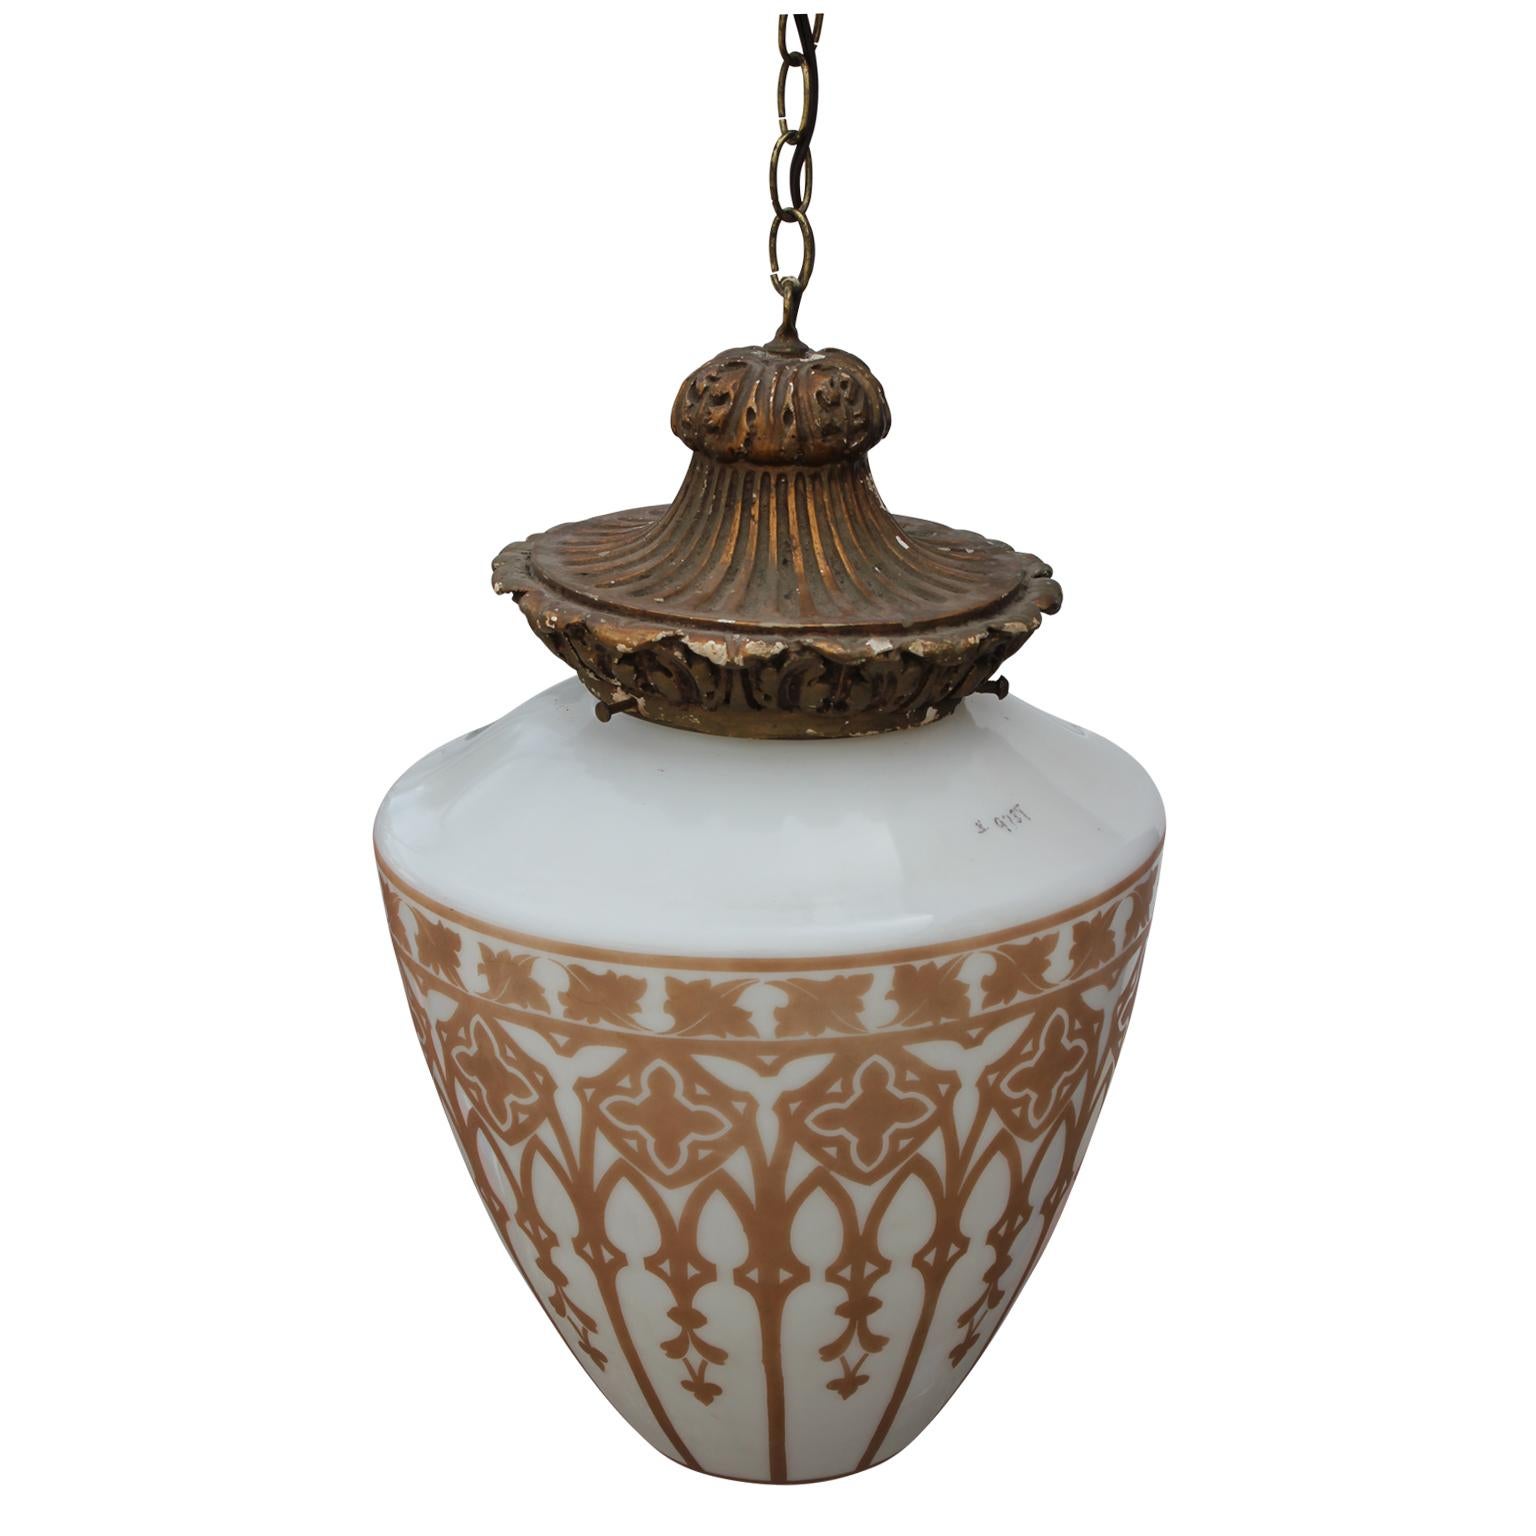 Stately vintage pendant light. It has a gold leafed base that holds the teardrop glass drum. Gold architectural stencils decorate the outside of the white glass, reminiscent of a stained glass window.